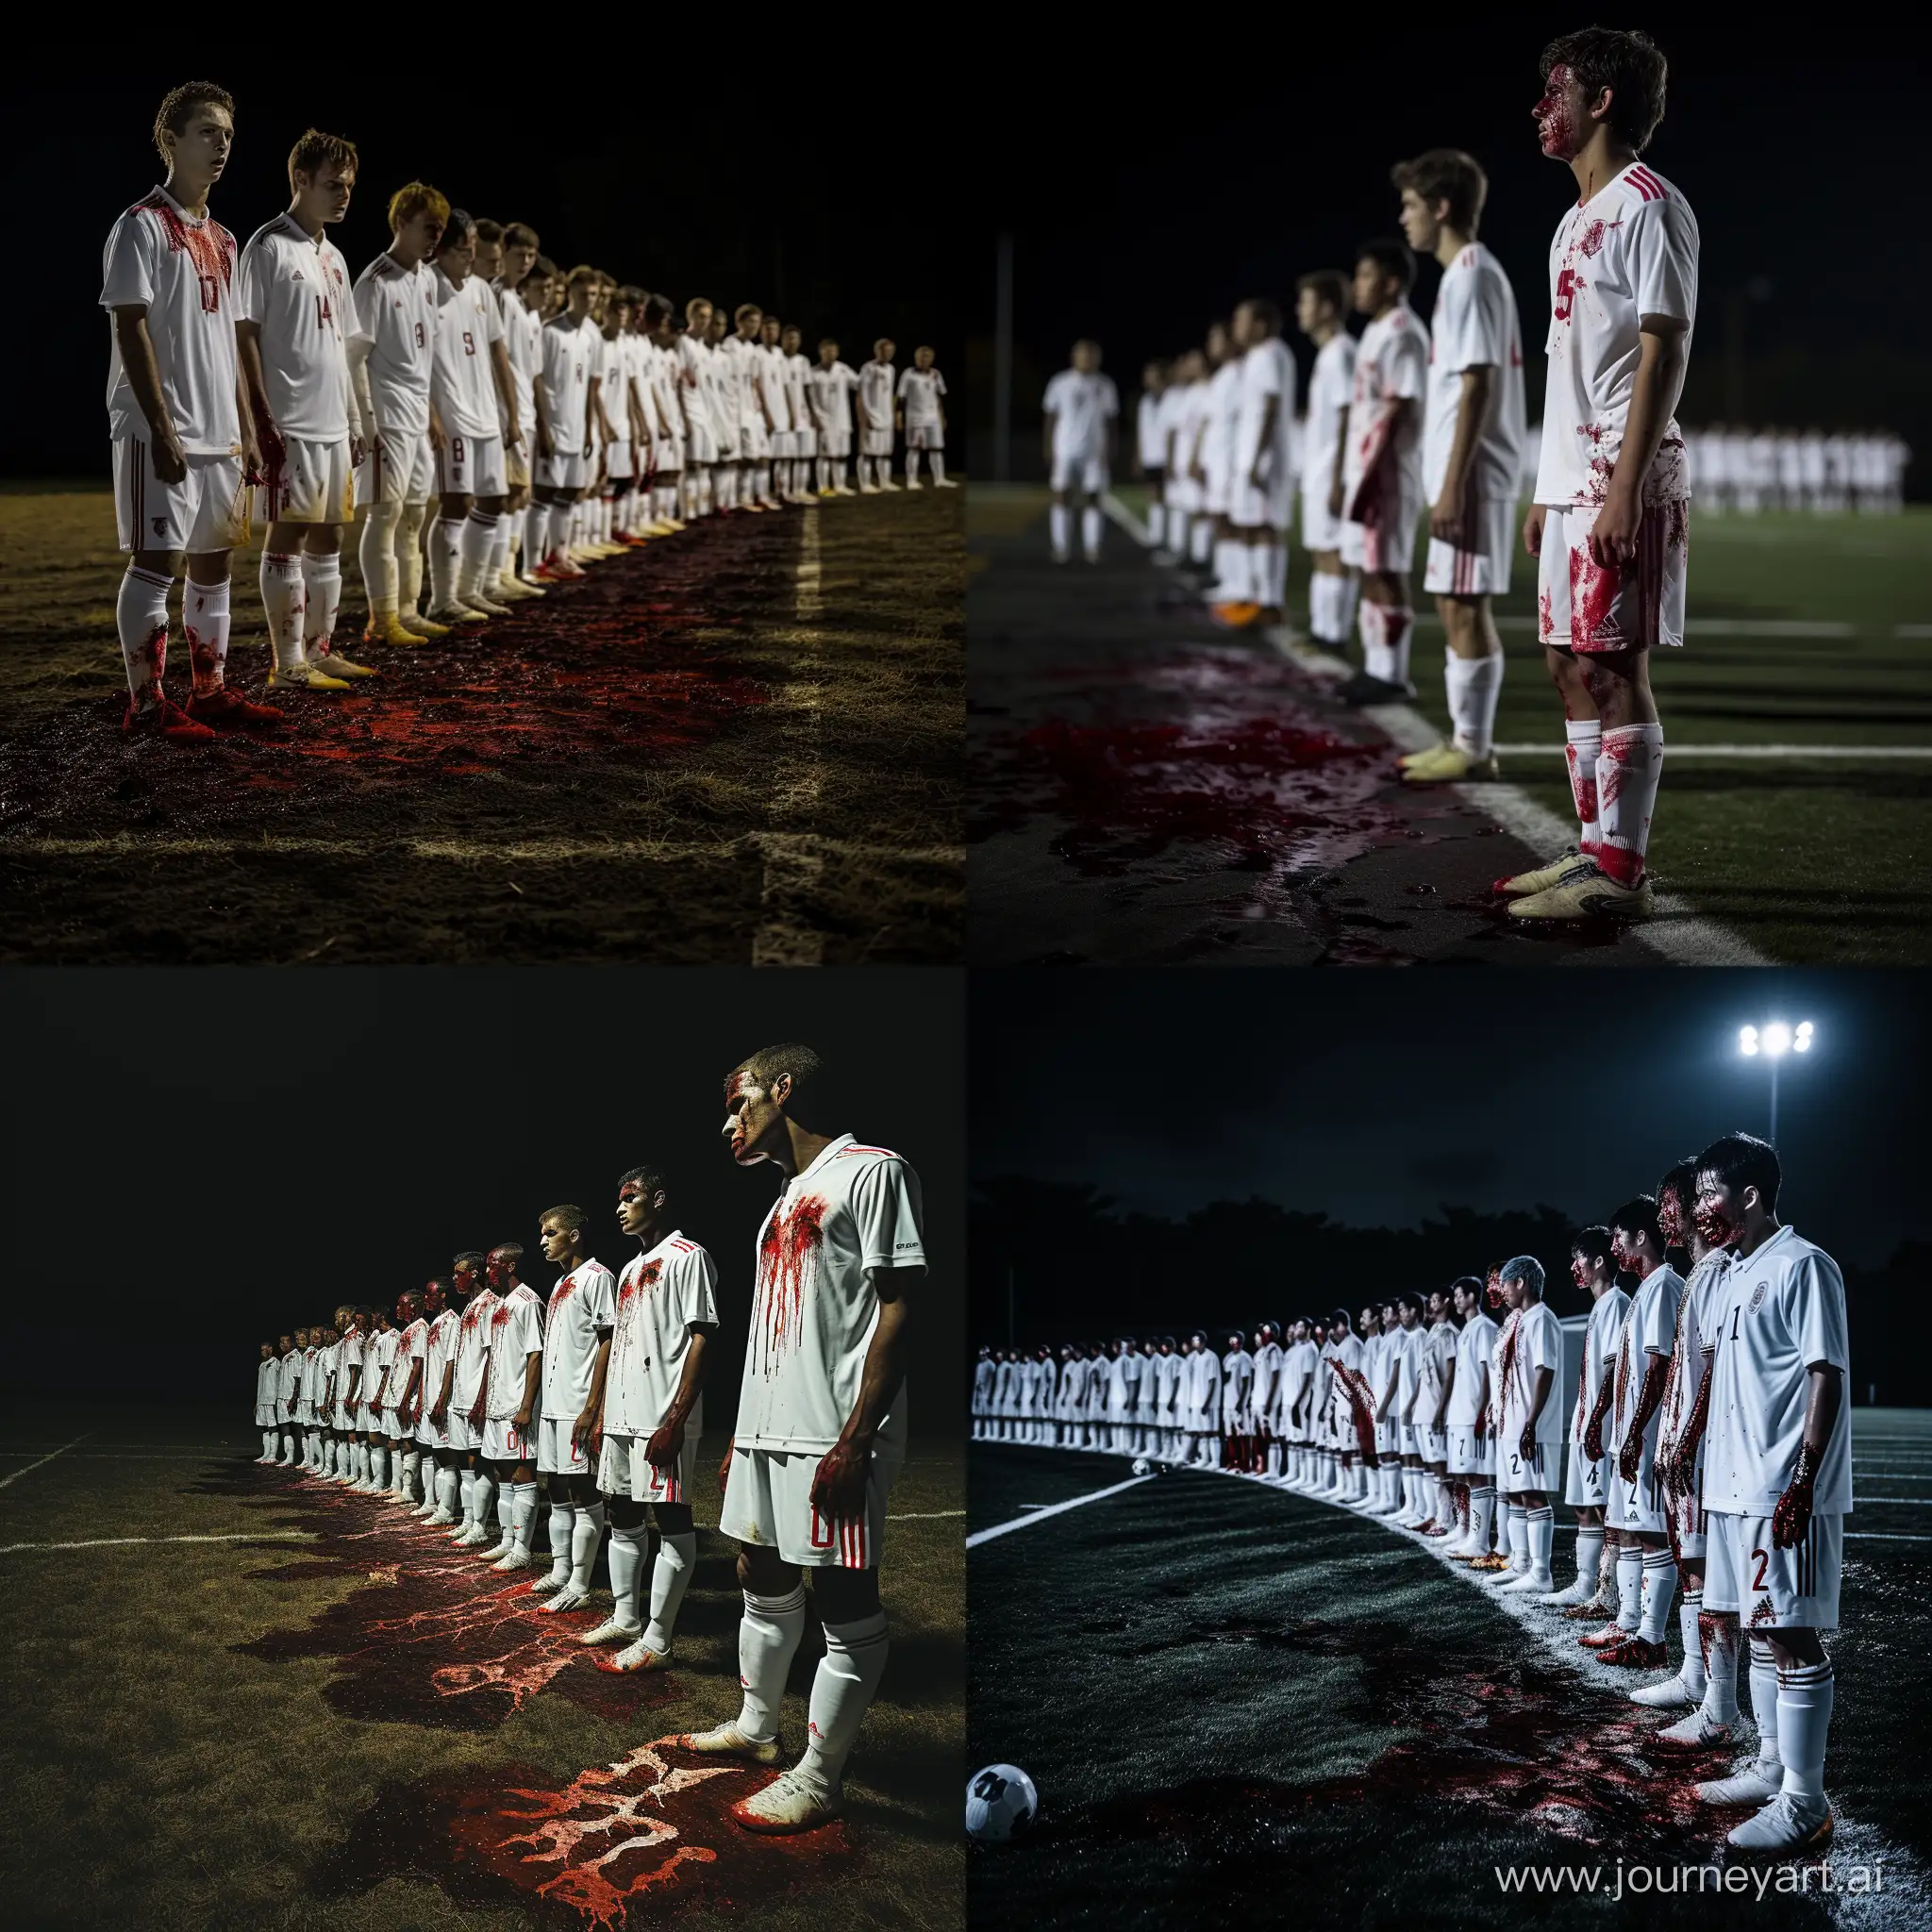 A soccer team in white and bloody uniform lined up on the bloody and dark field